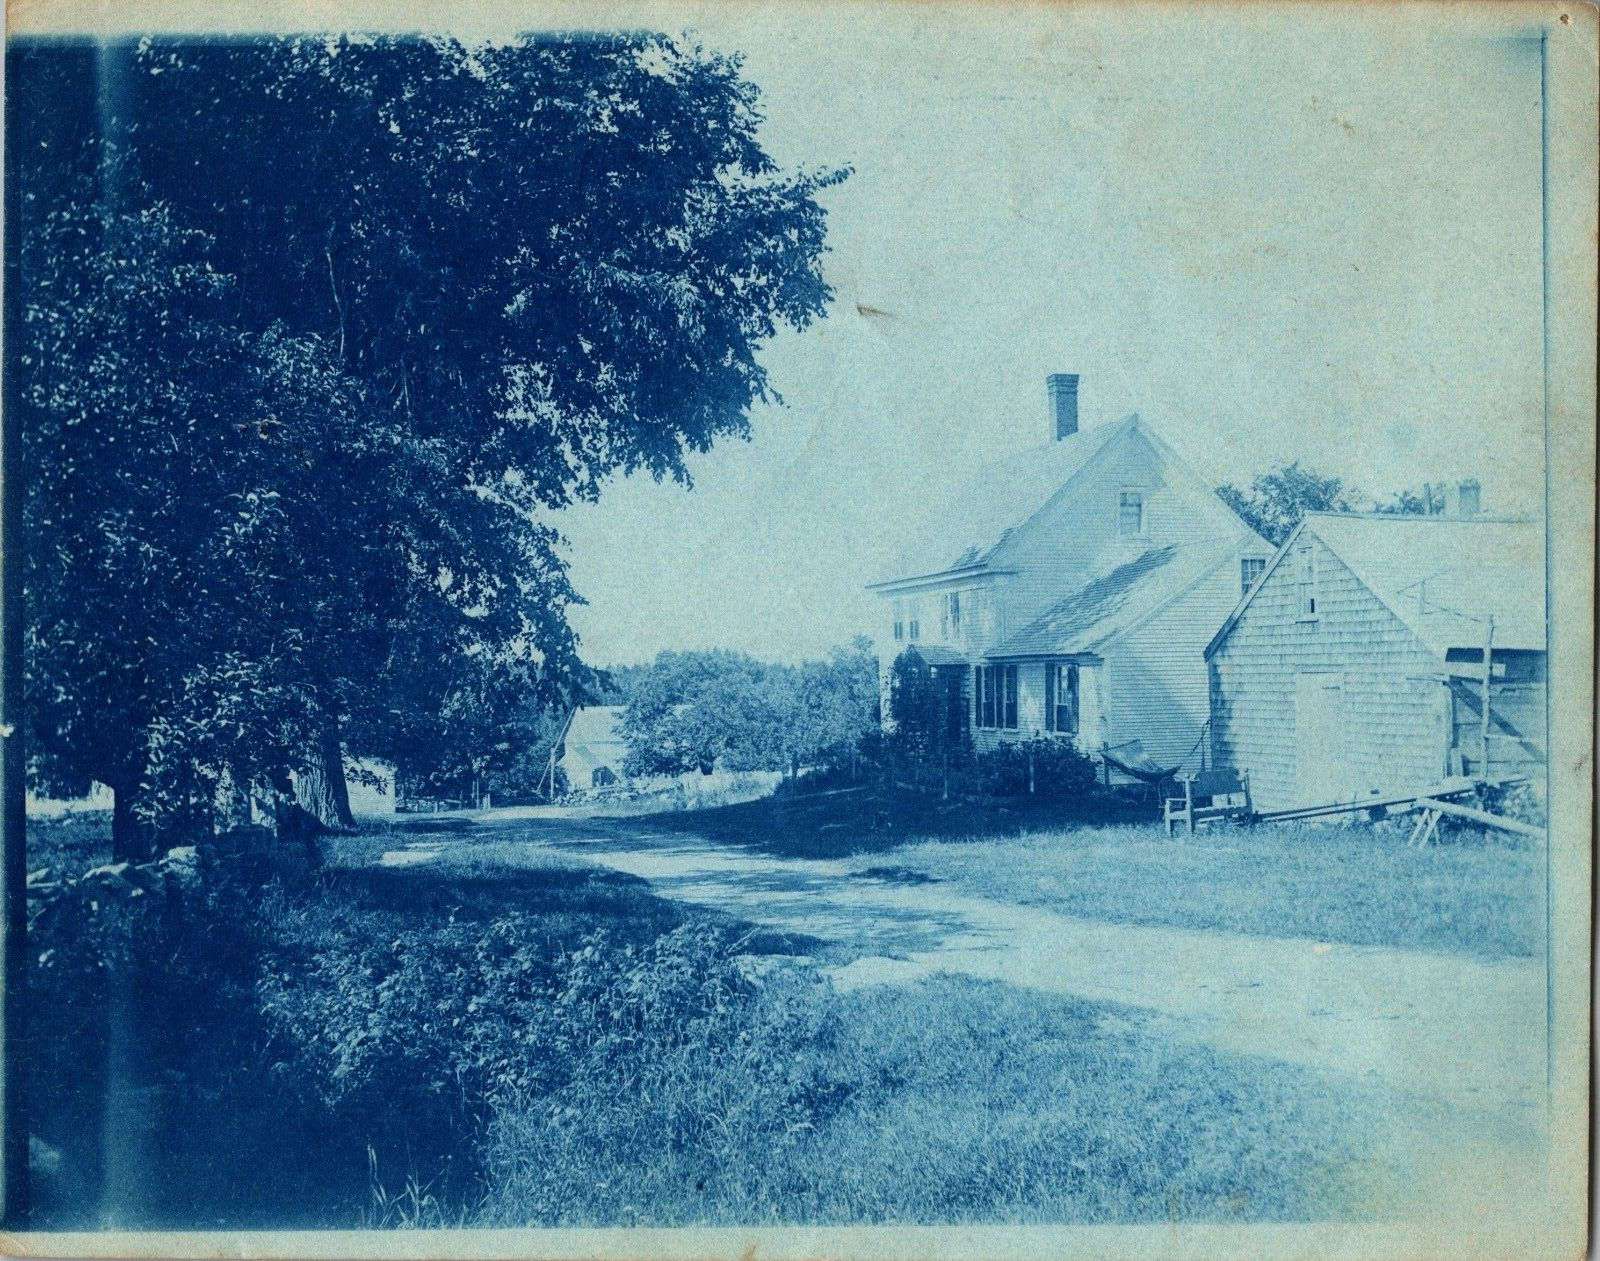 Old Farmhouse View with County Road Antique Cyanotype Photo 1880s